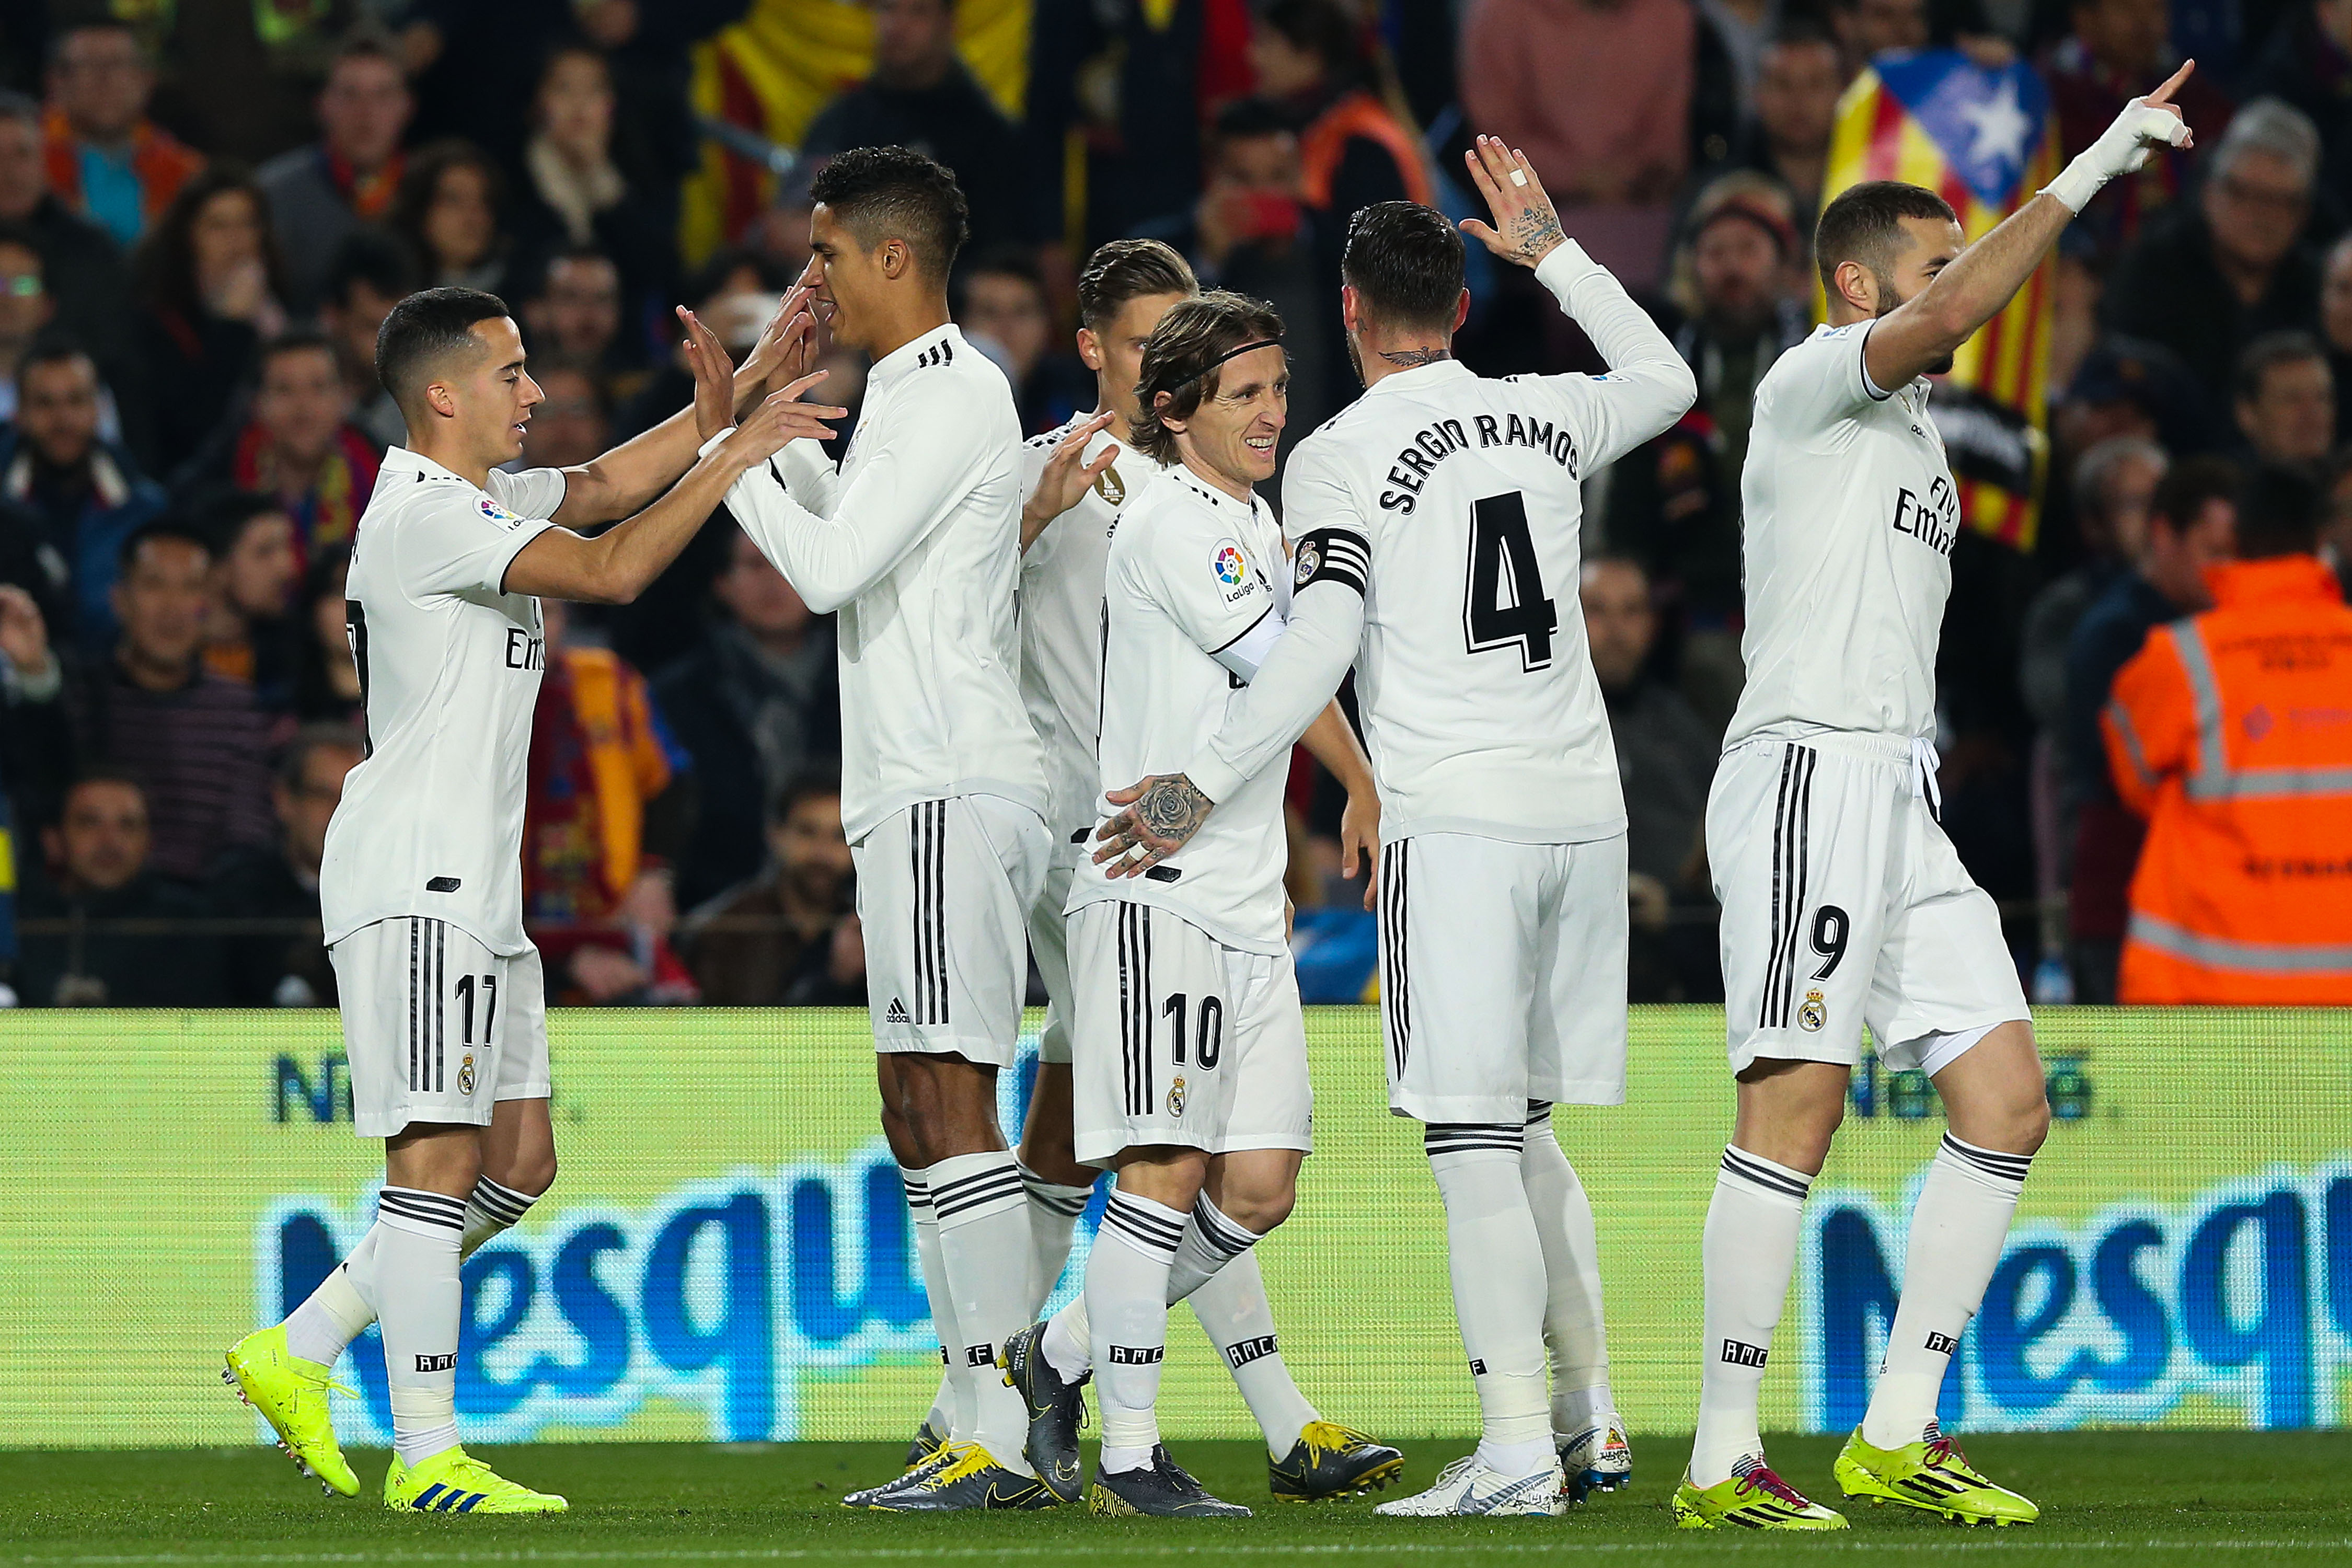 BARCELONA, SPAIN - FEBRUARY 06: Lucas Vazquez of Real Madrid CF celebrates with his team mates after scoring his team's first goal during the Copa del Semi Final first leg match between Barcelona and Real Madrid at Nou Camp on February 06, 2019 in Barcelona, Spain. (Photo by Angel Martinez/Getty Images)